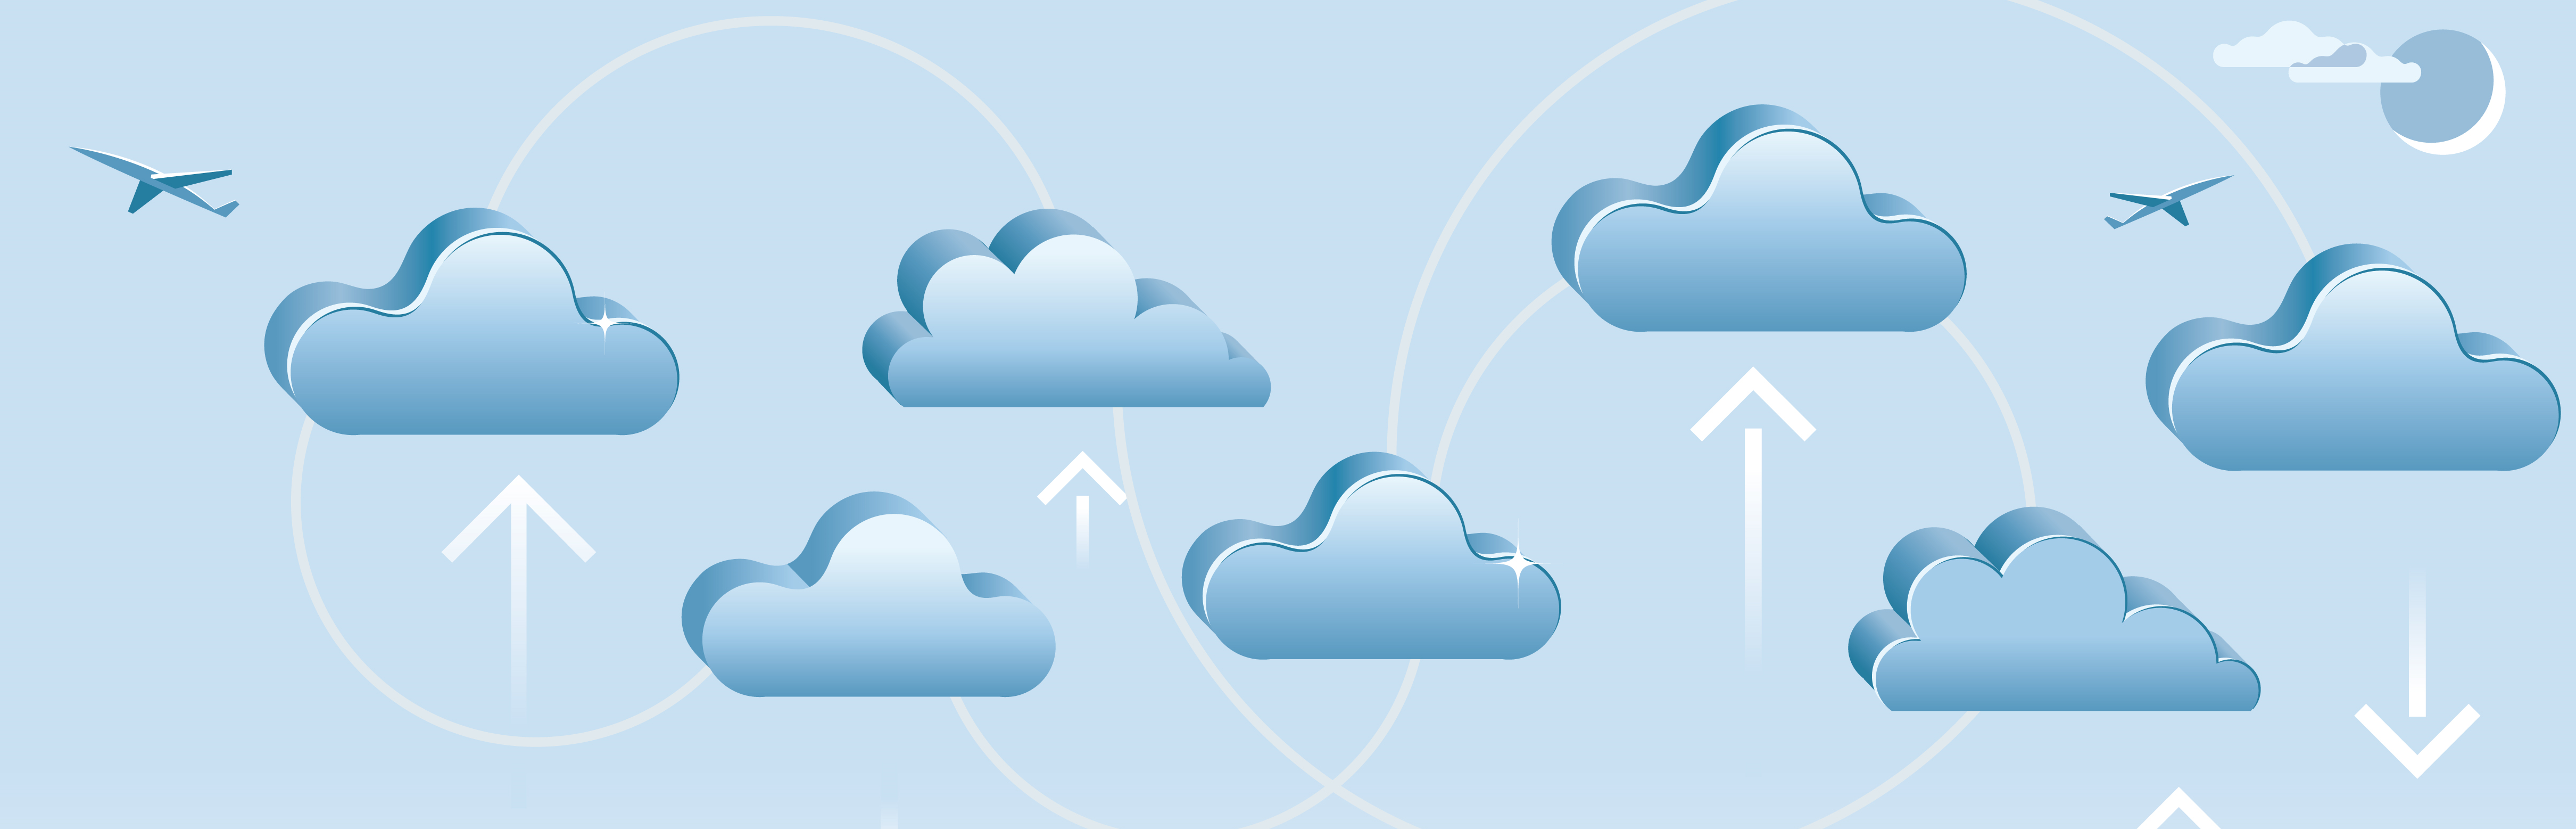 Building a Multi-Cloud Strategy? Be Sure to Address the Security and Management Challenges